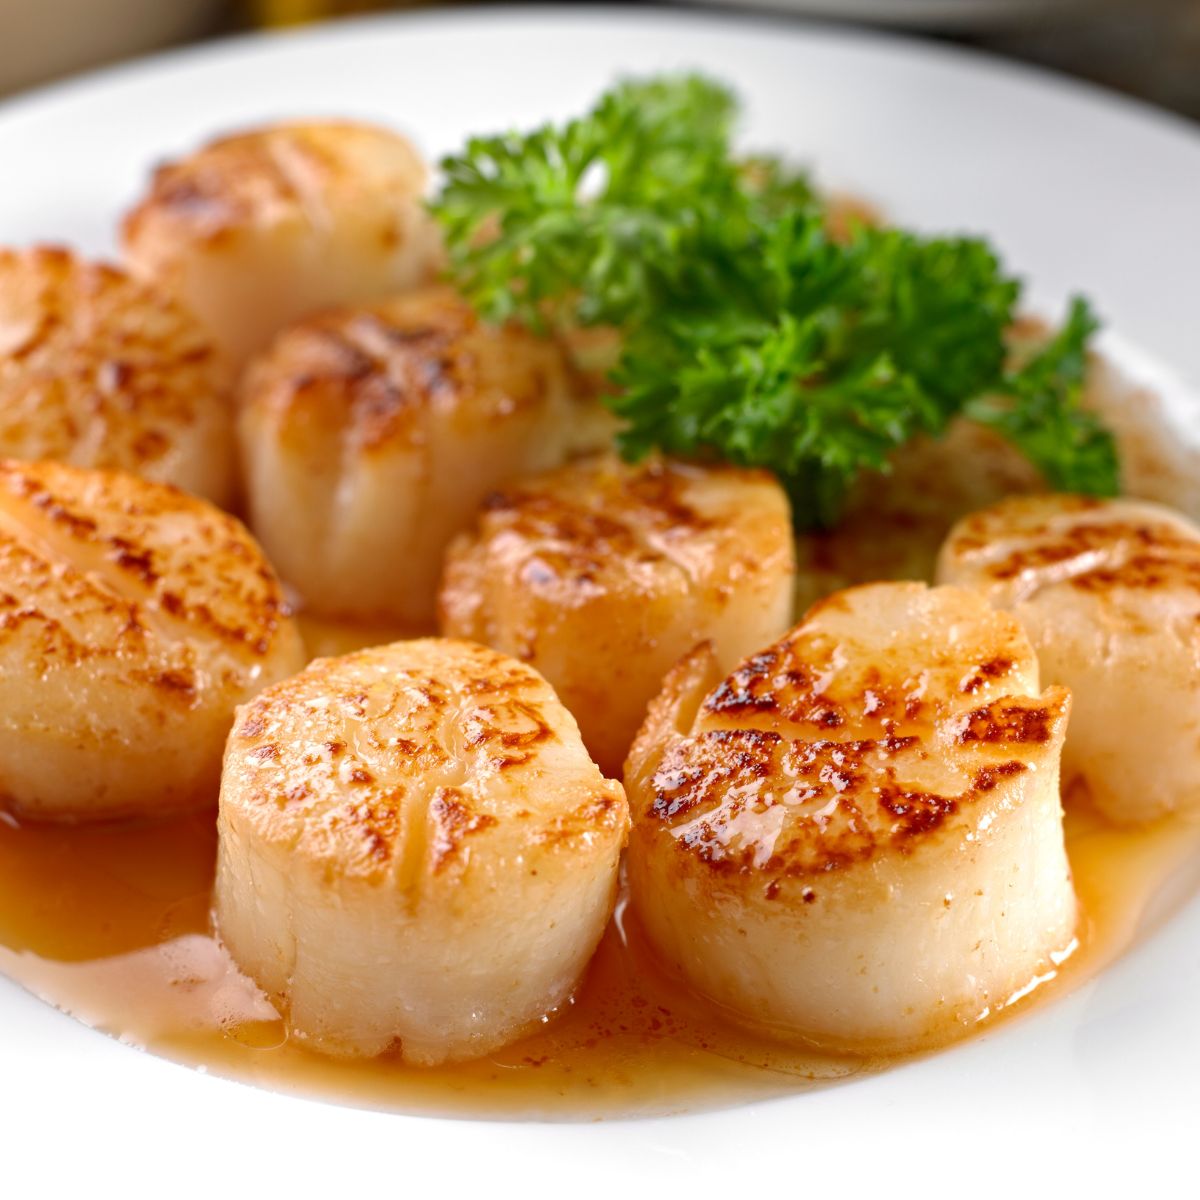 Scallops seared in brown butter on a plate